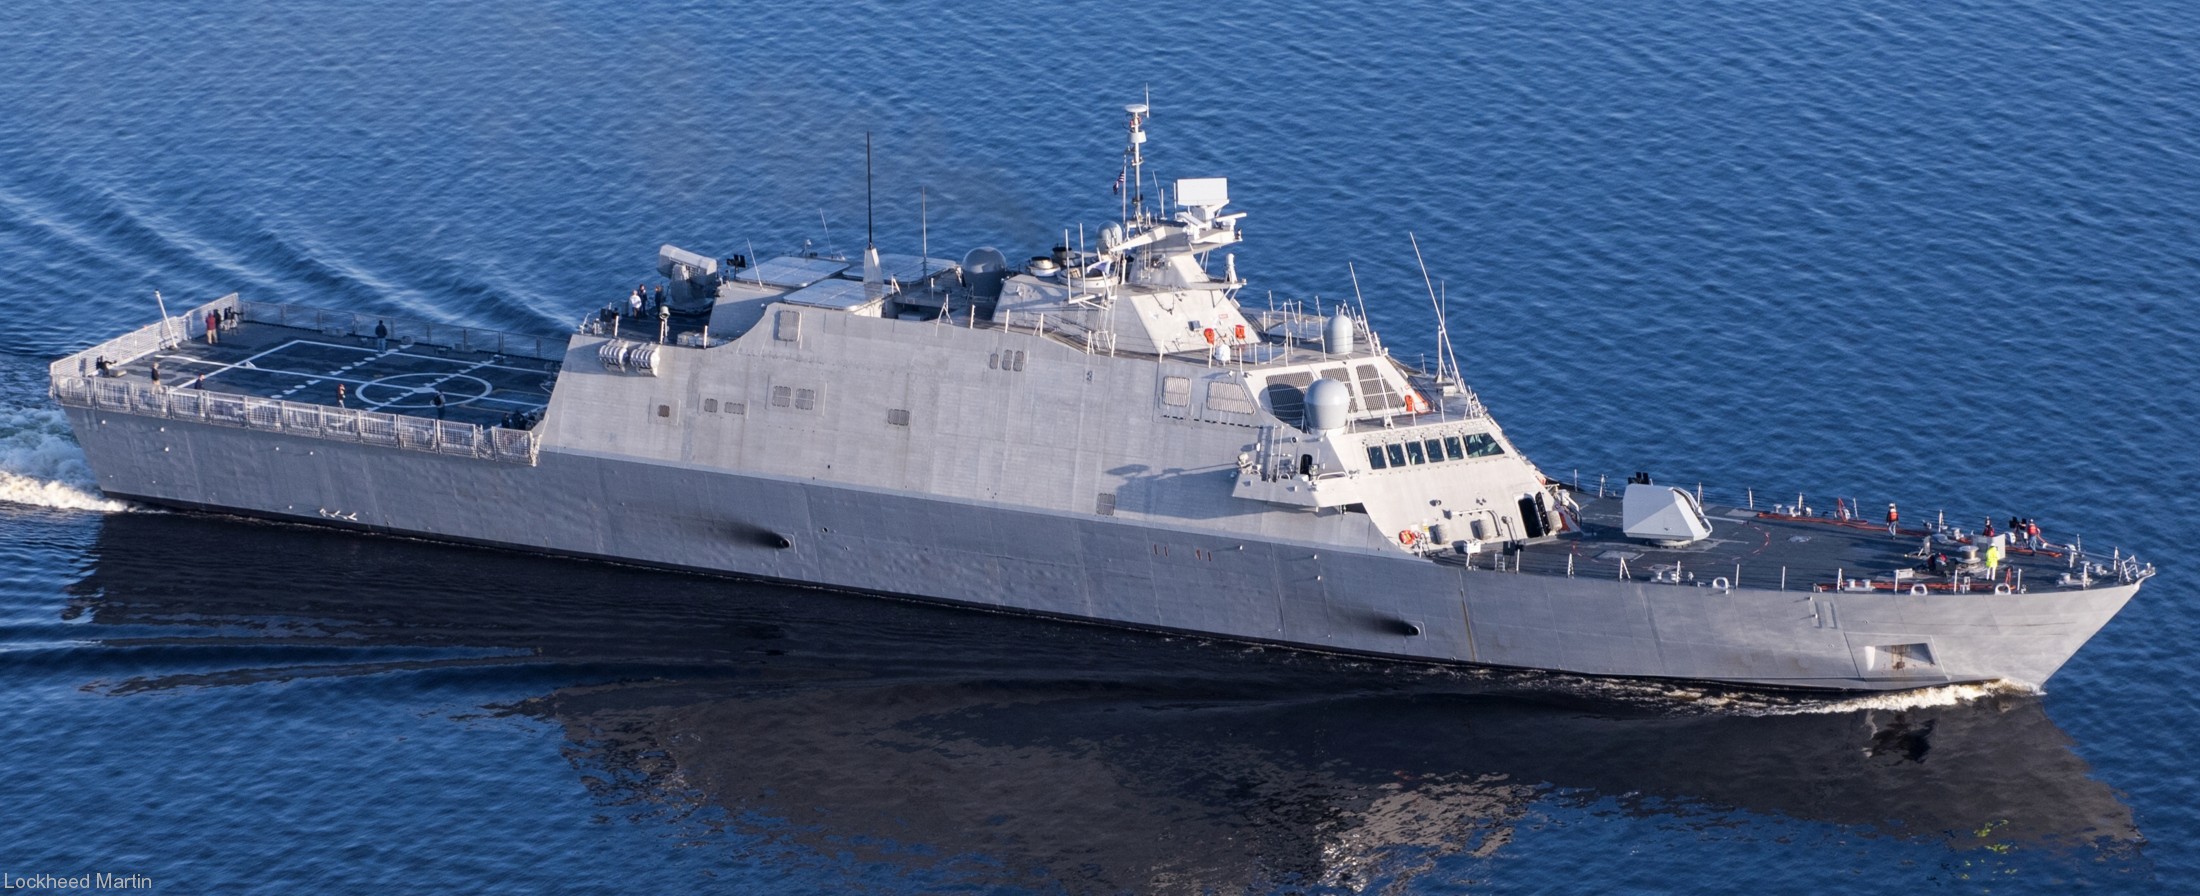 lcs-11 uss sioux city freedom class littoral combat ship us navy 22 trials lake michigan